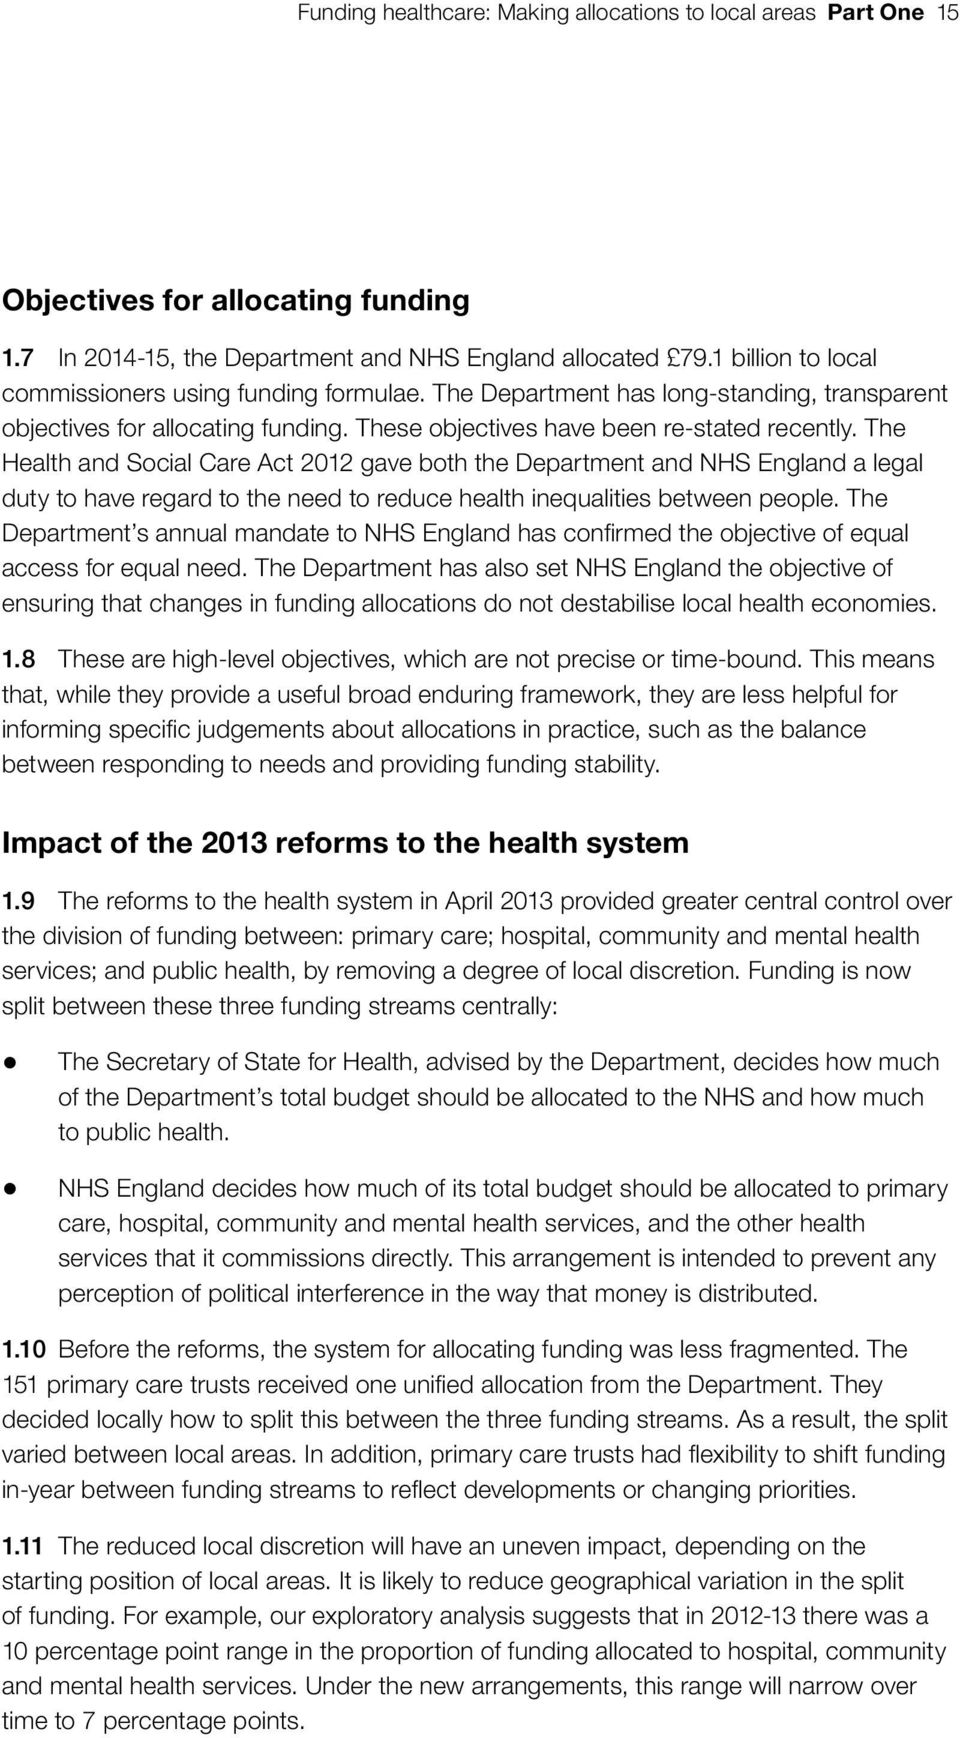 The Health and Social Care Act 2012 gave both the Department and NHS England a legal duty to have regard to the need to reduce health inequalities between people.